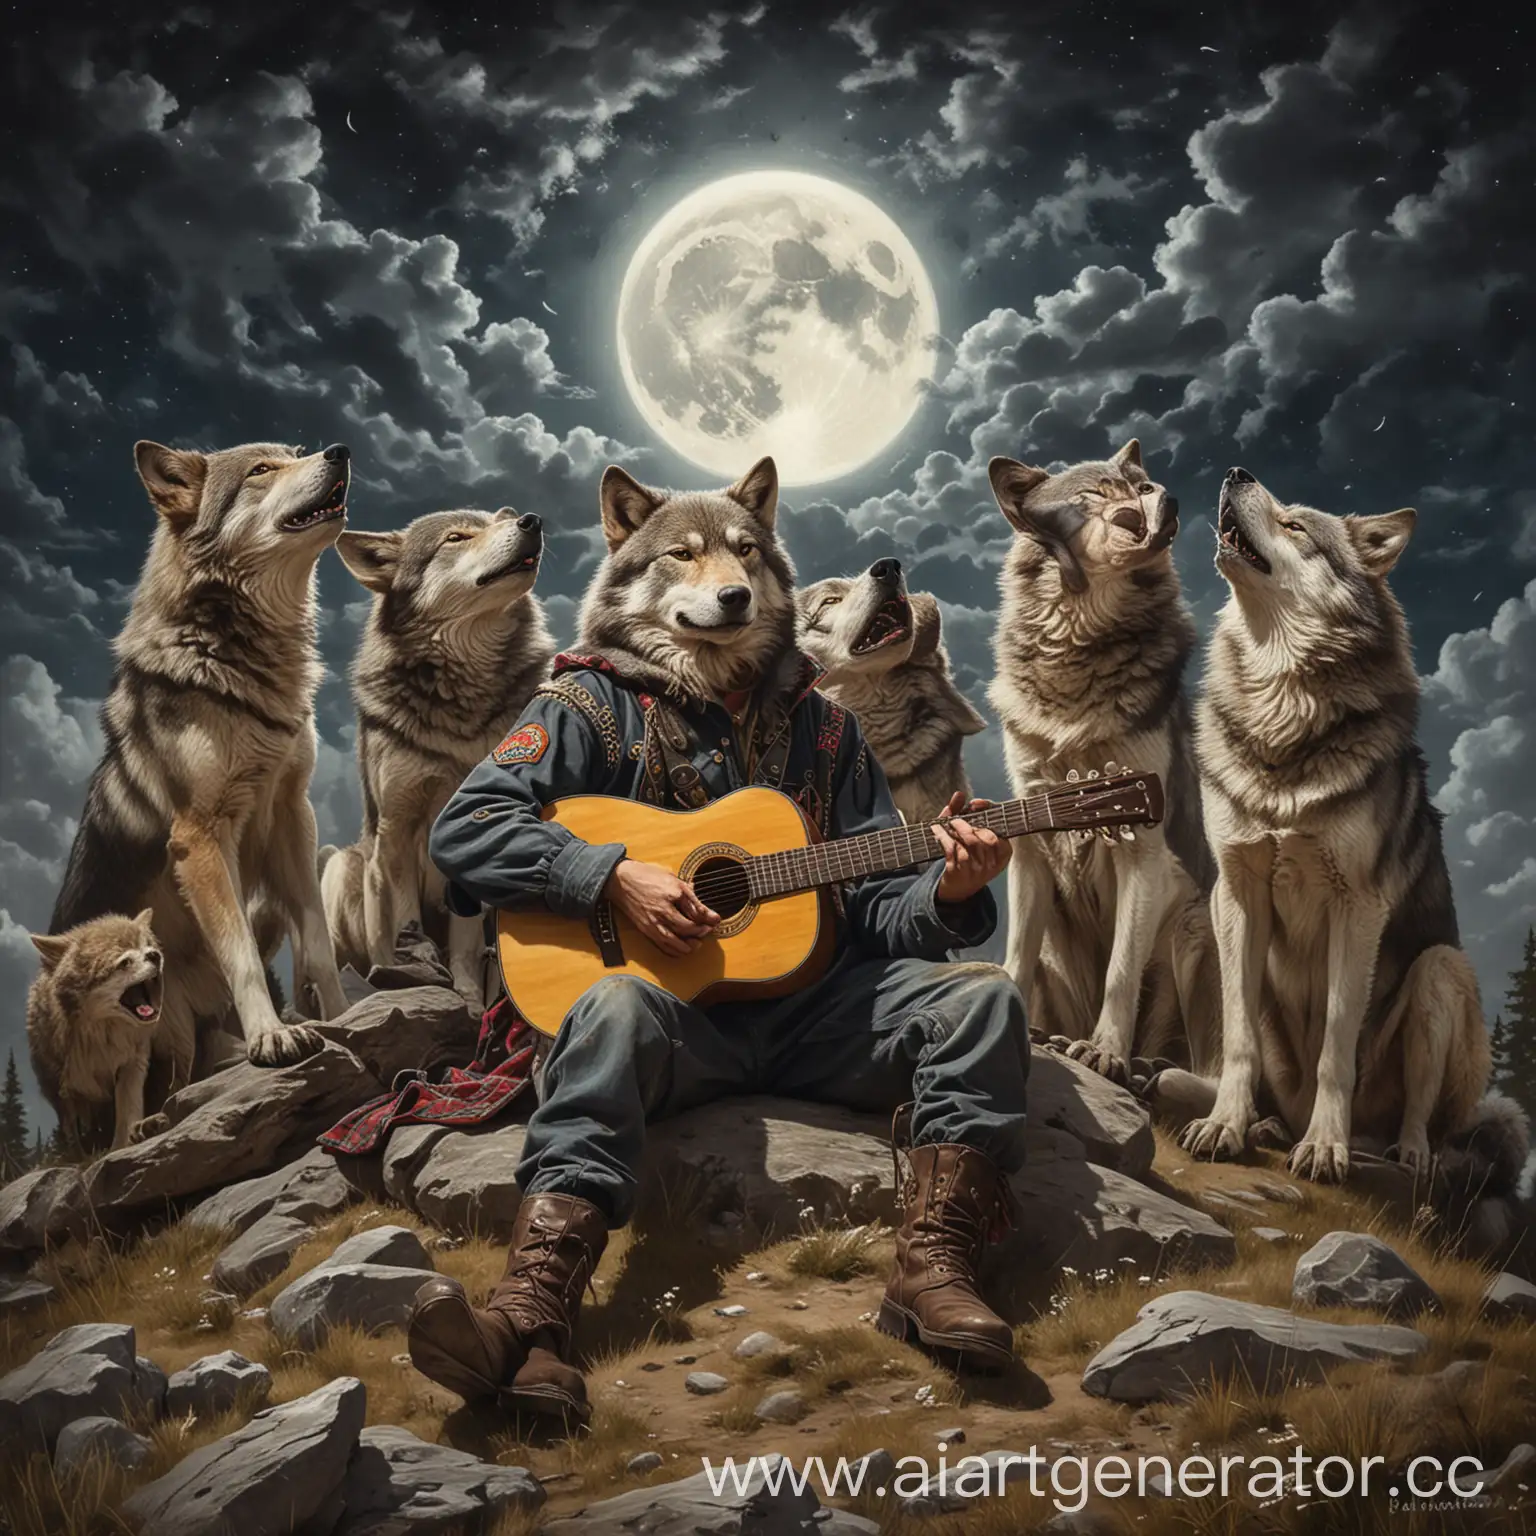 Fearful-Guitarist-Singing-Amidst-Ten-Wolves-in-Traditional-Russian-Attire-on-Moonlit-Hilltop